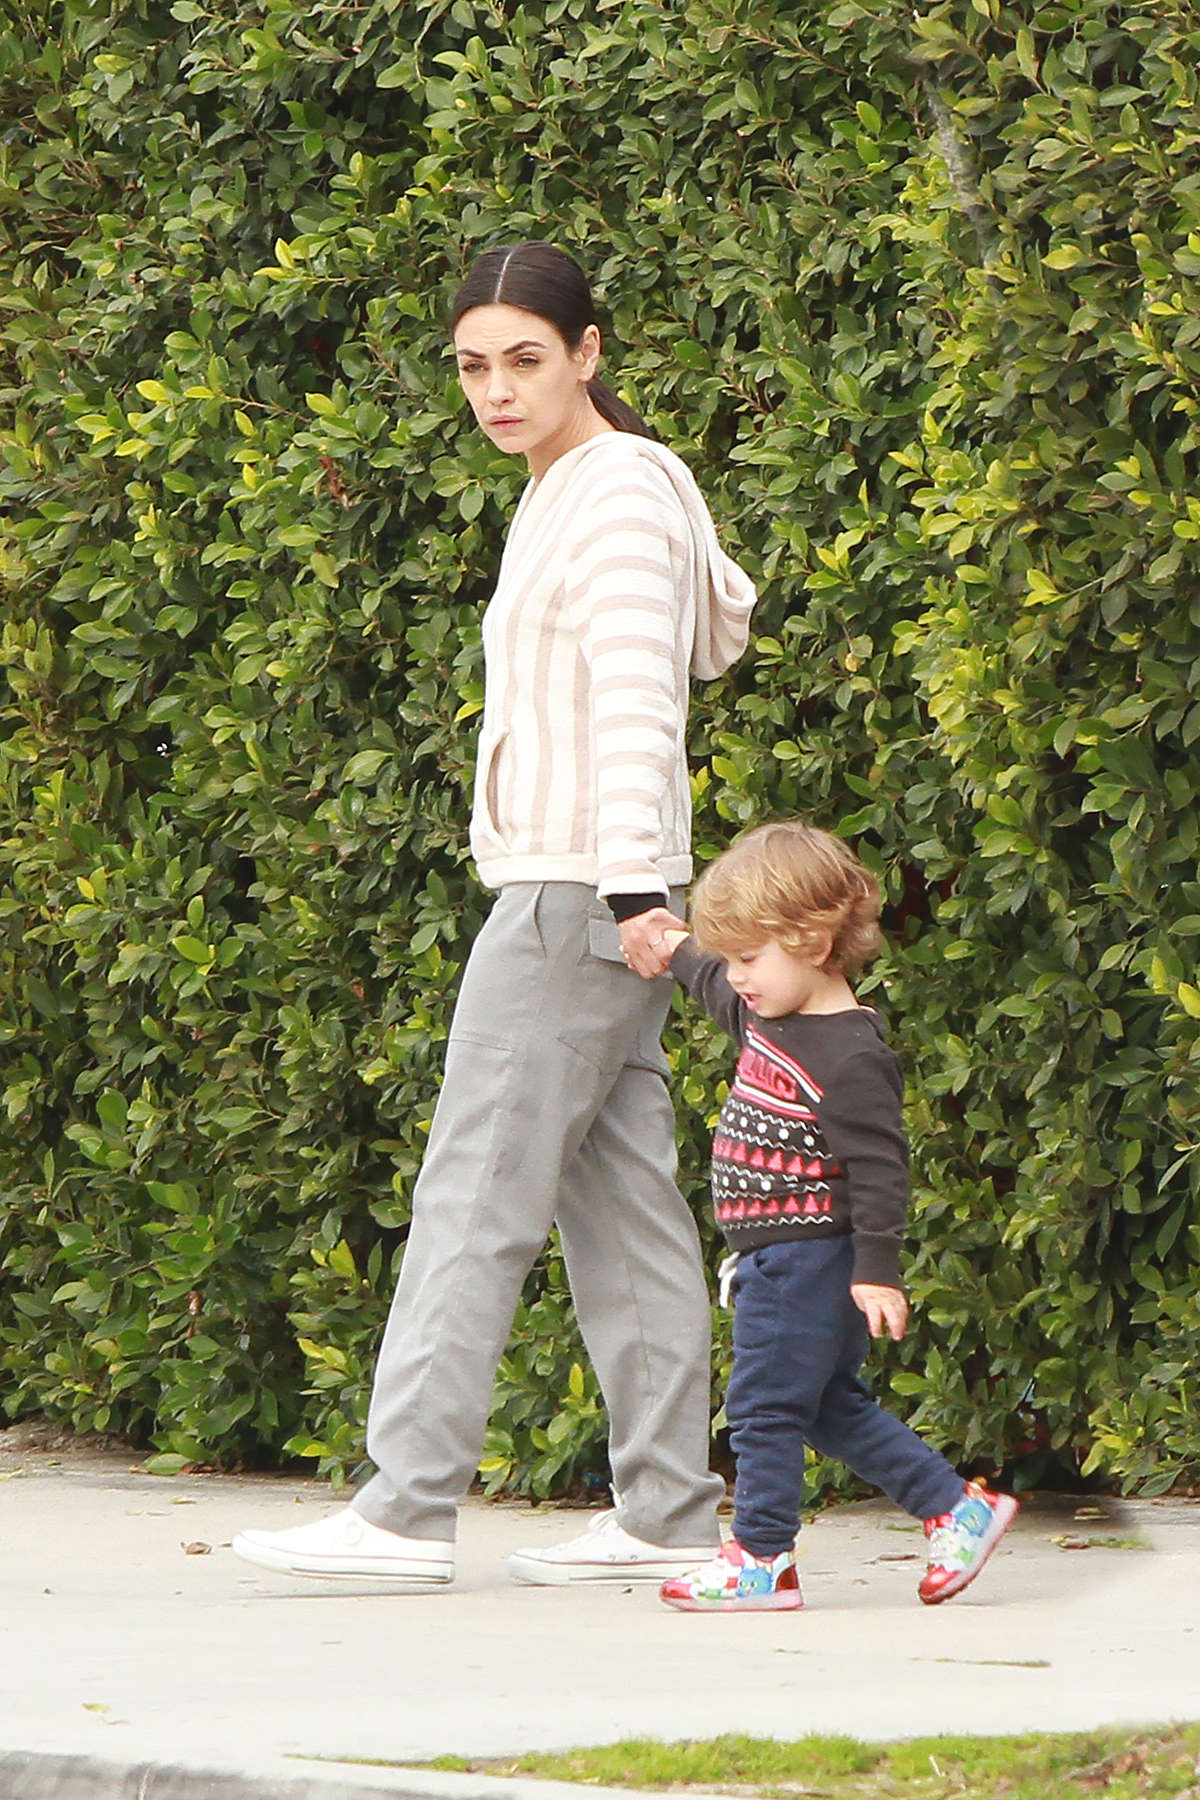 Mila Kunis Steps Out With 2YearOld Son Dimitri in New Photos